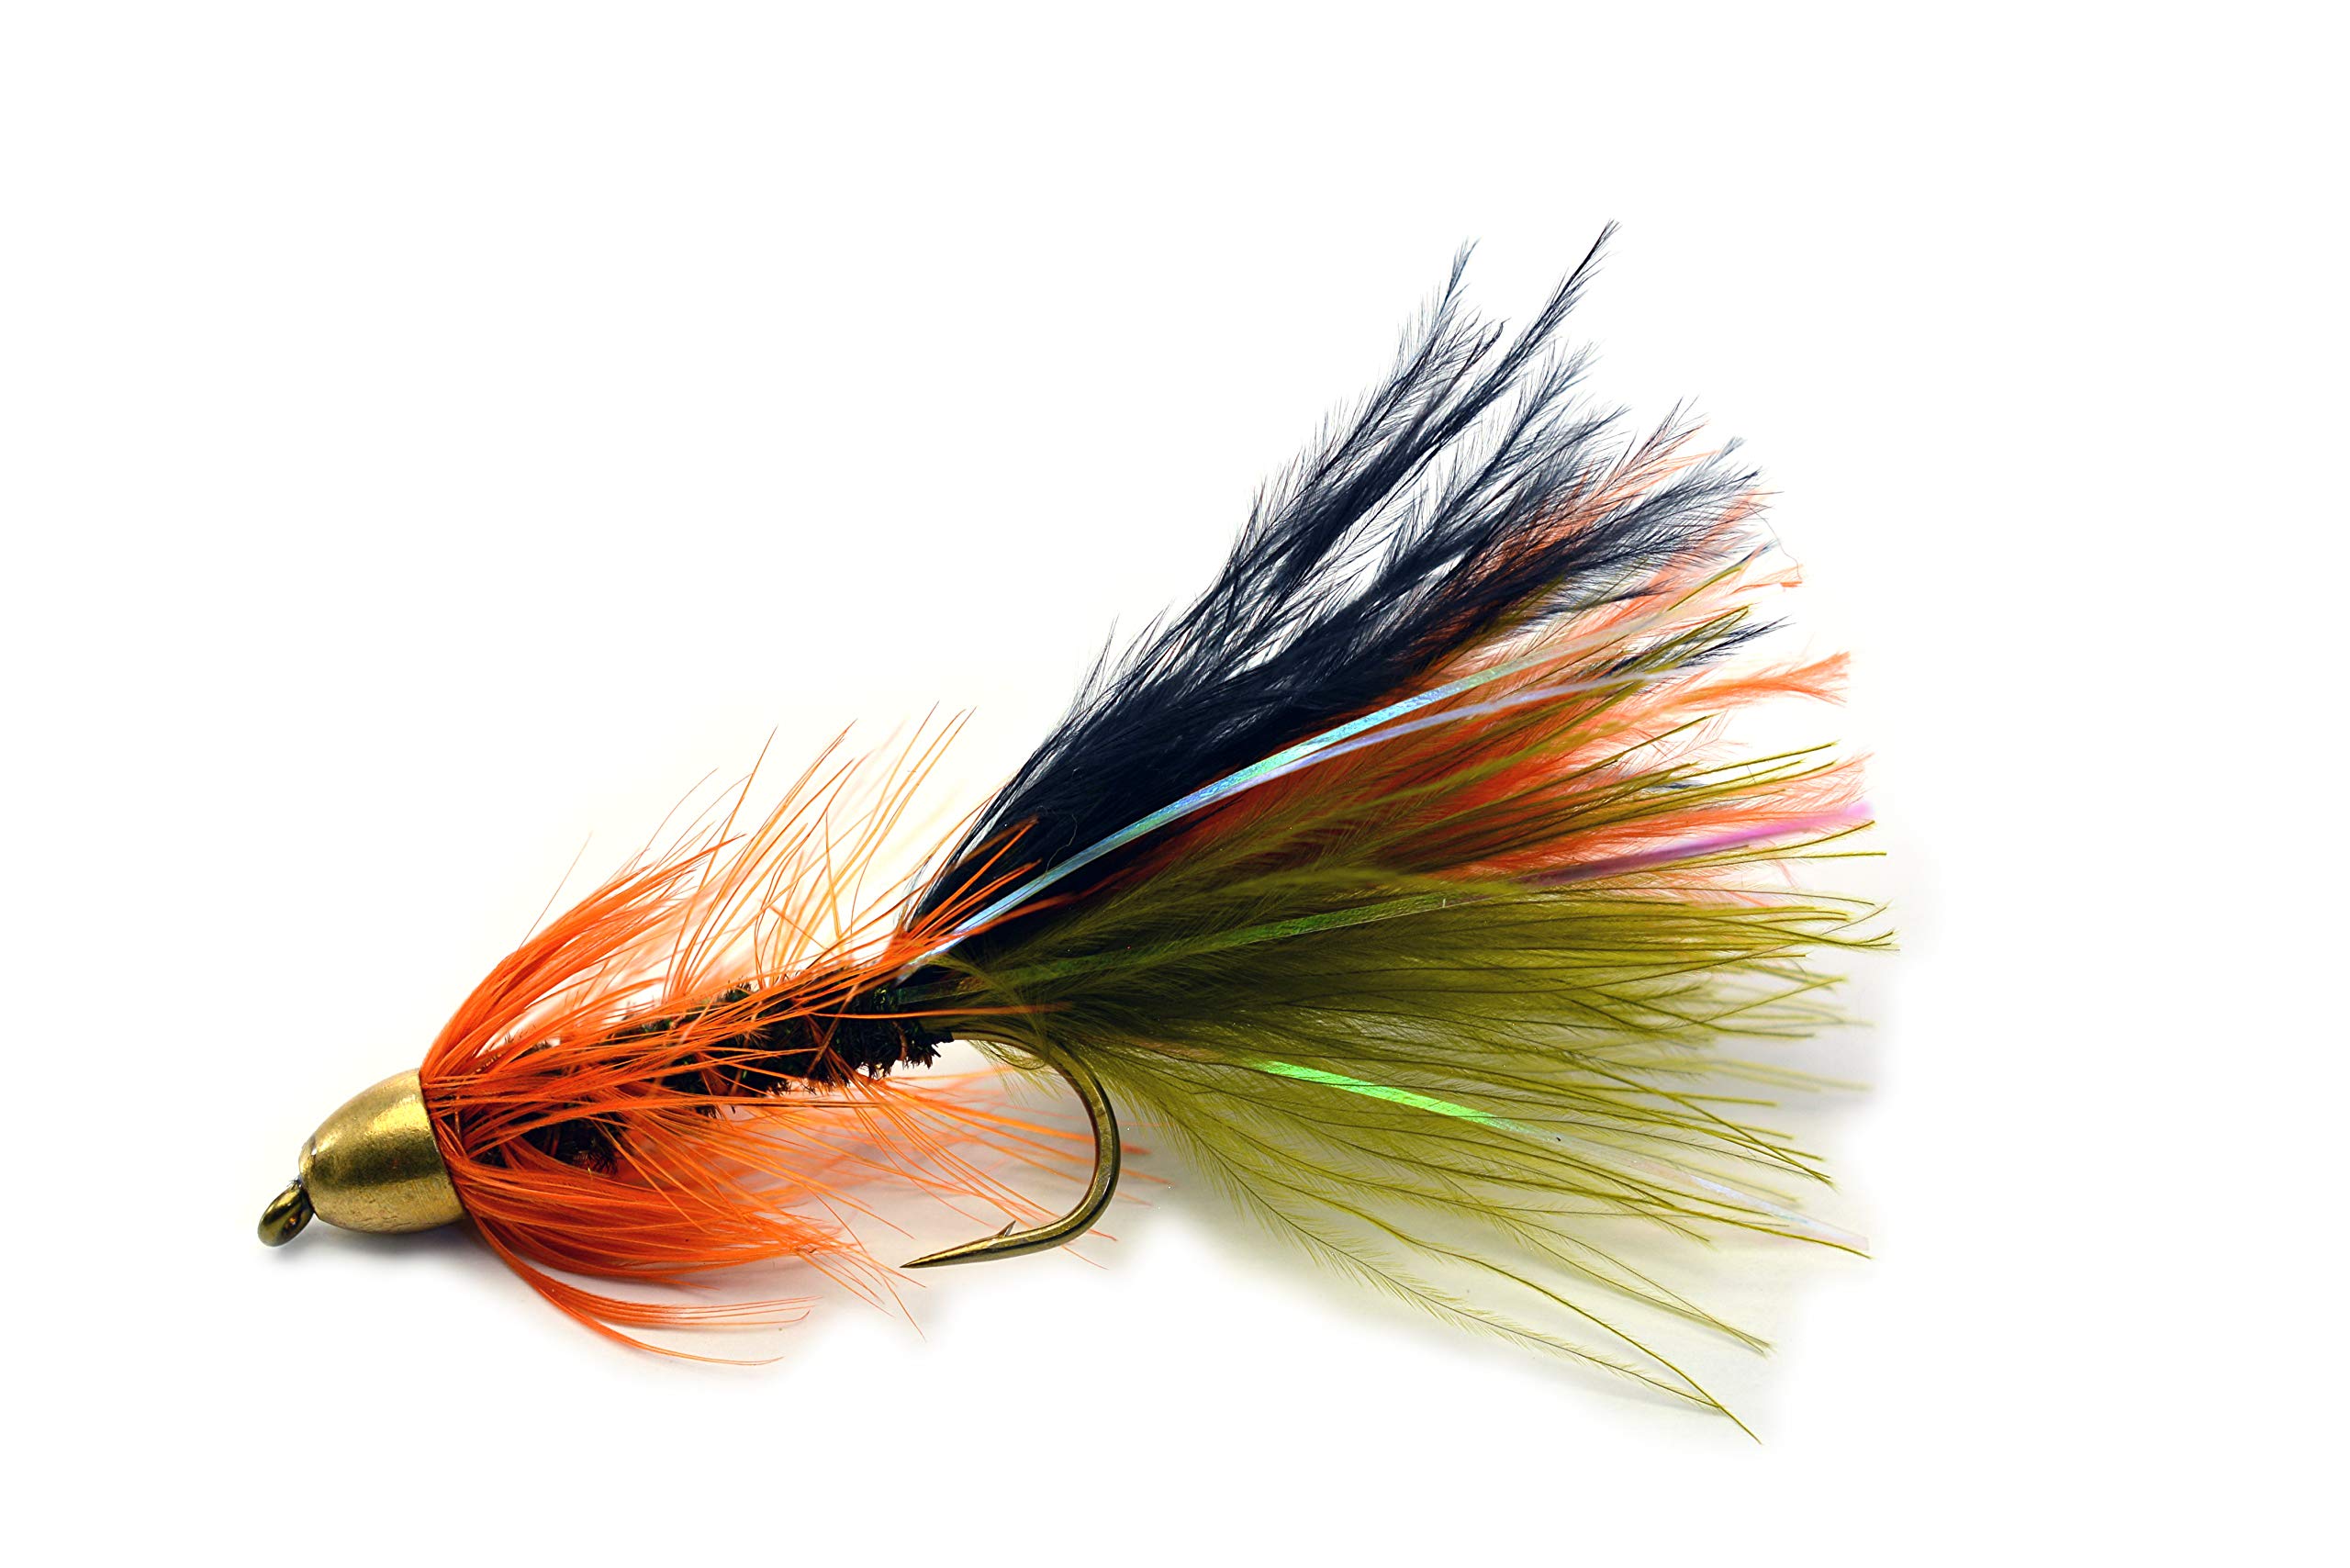 Thin Mint Streamer Fly Fishing Flies, Cone Head, Weighted, Mustad  Signature Hooks - 12 Flies in Hook #6, #8, #10 or #12